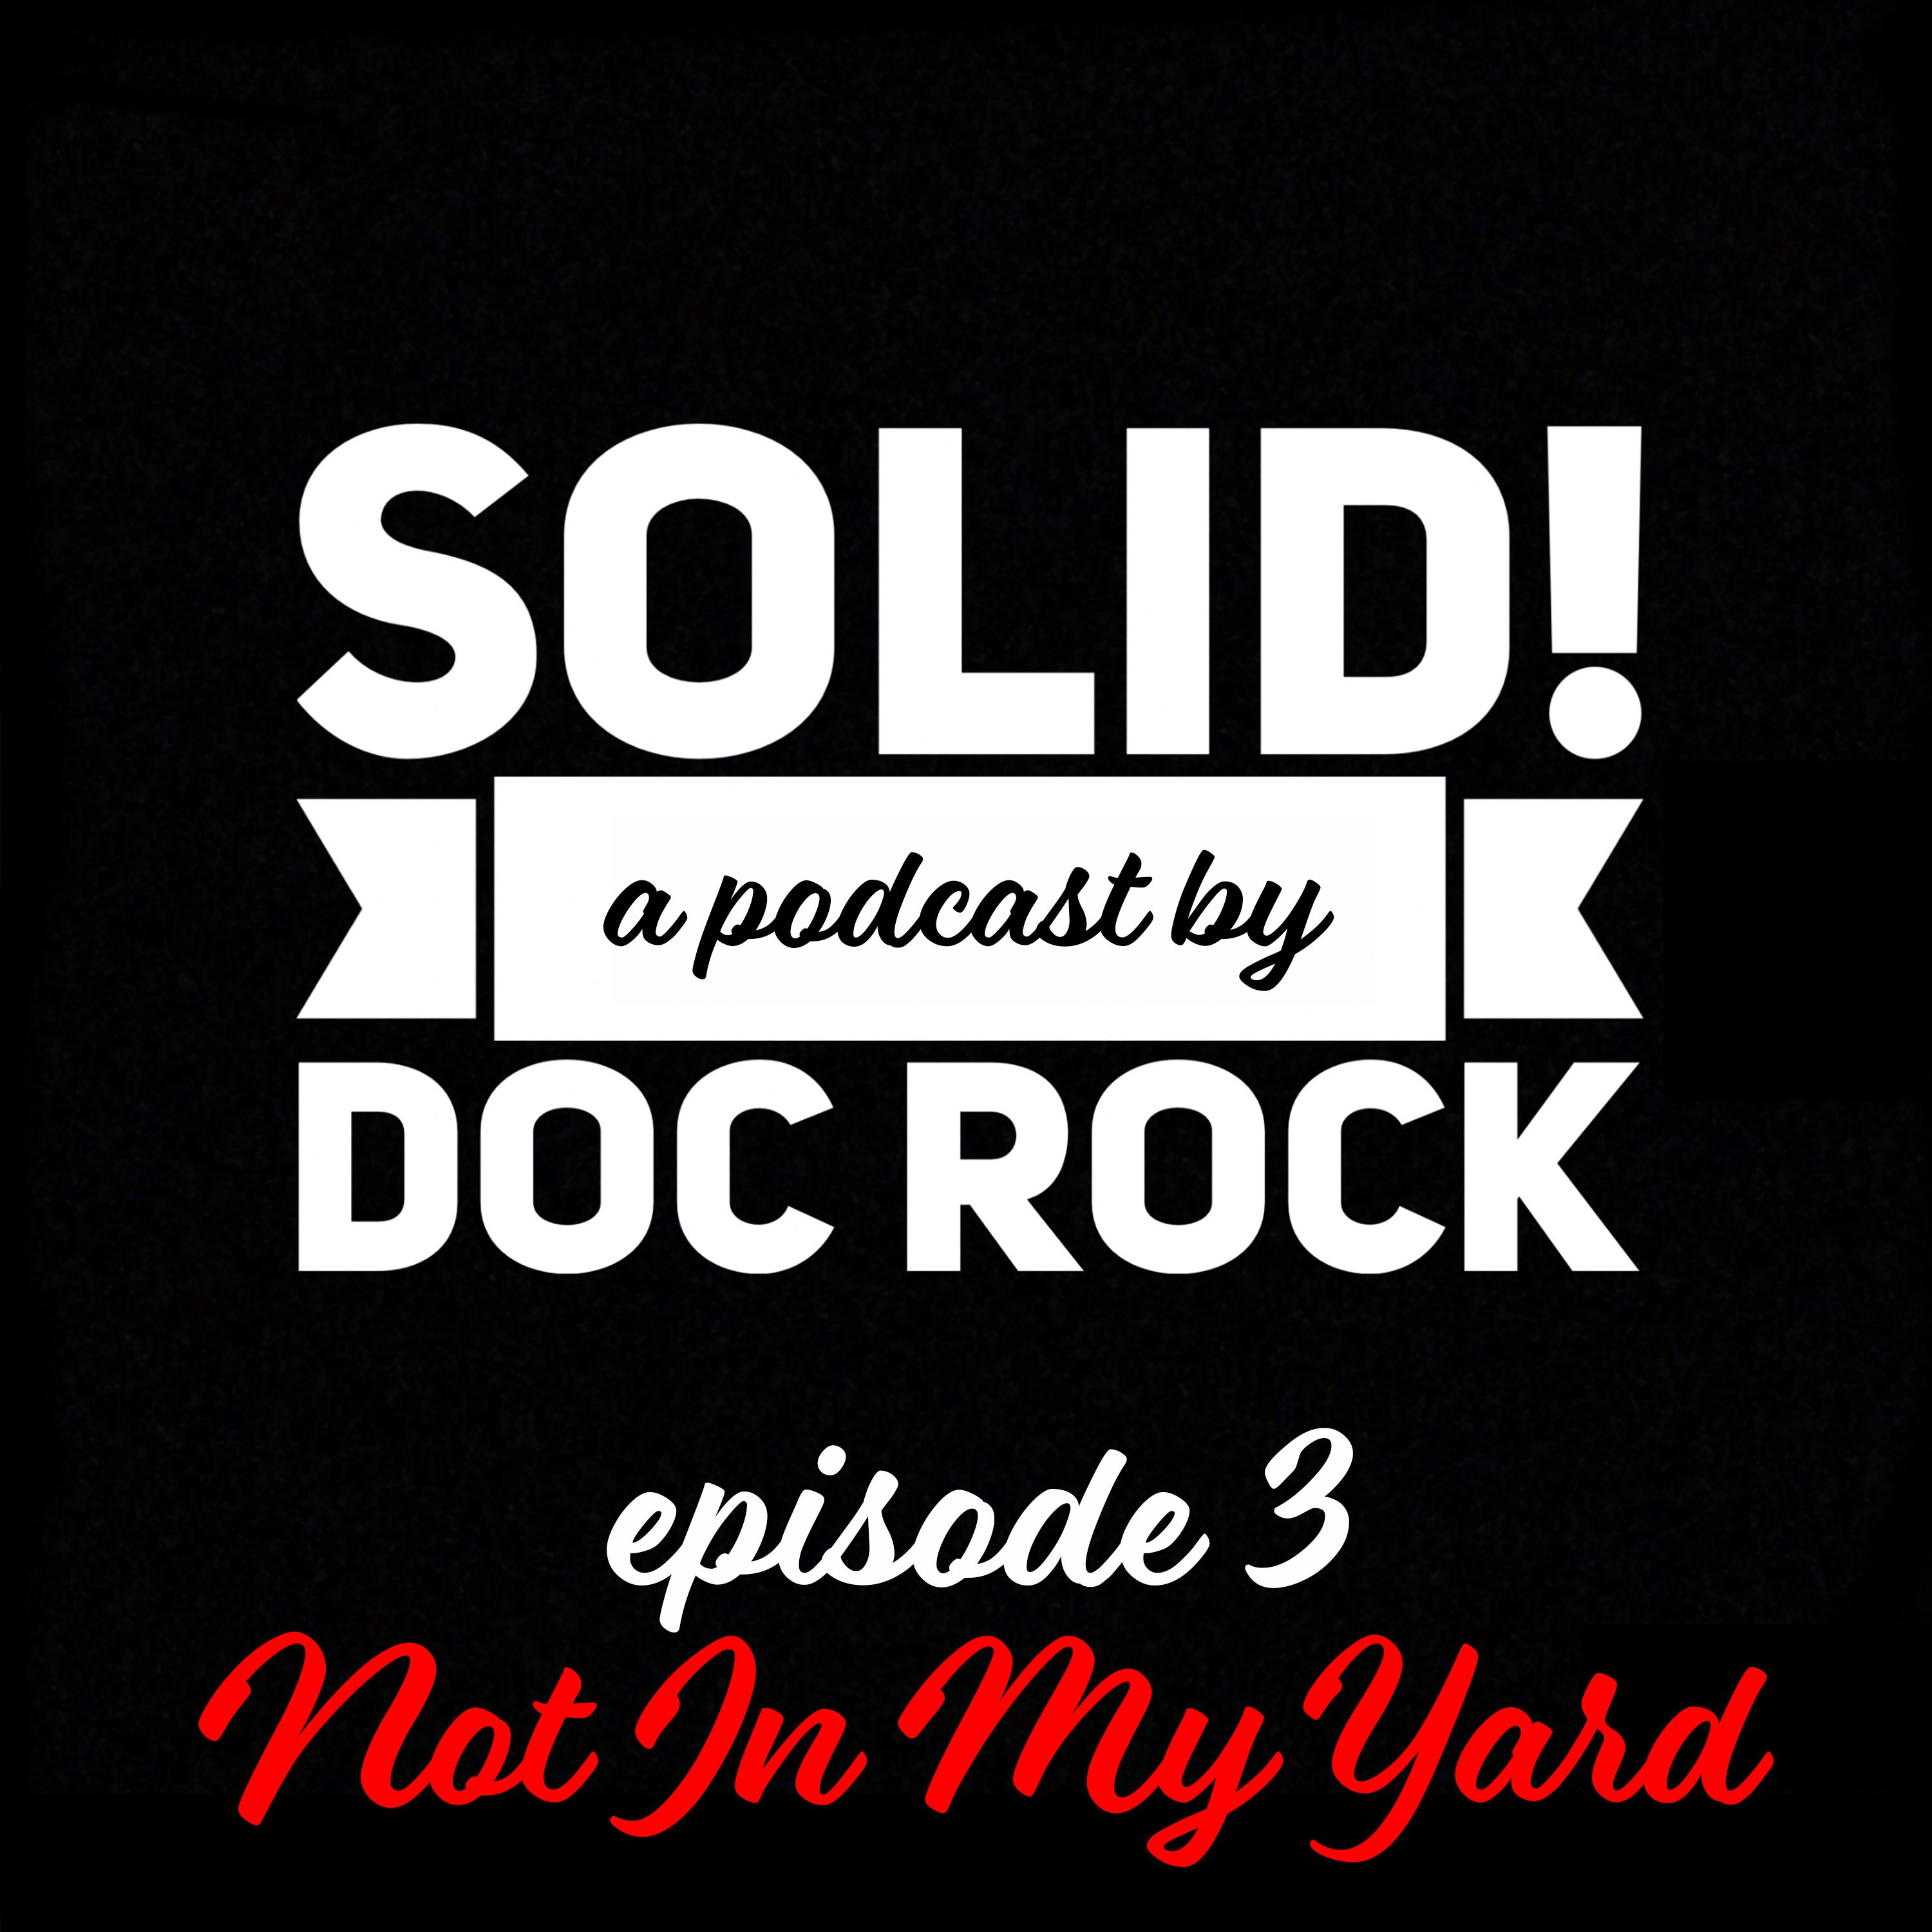 The Solid Podcast: Episode 3 - Not In My Yard